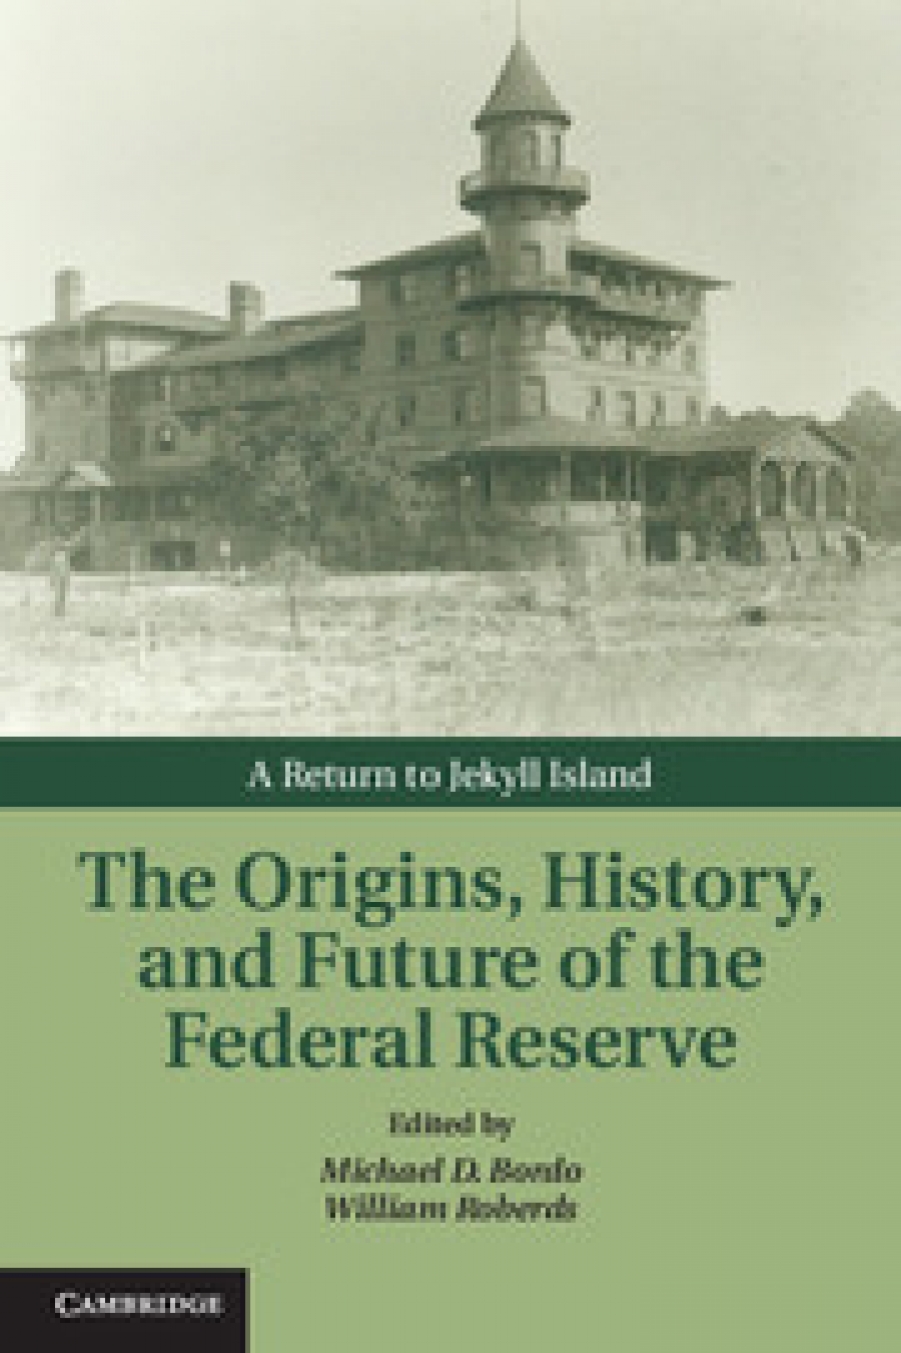 Michael D.B. The Origins, History, and Future of the Federal Reserve. A Return to Jekyll Island 